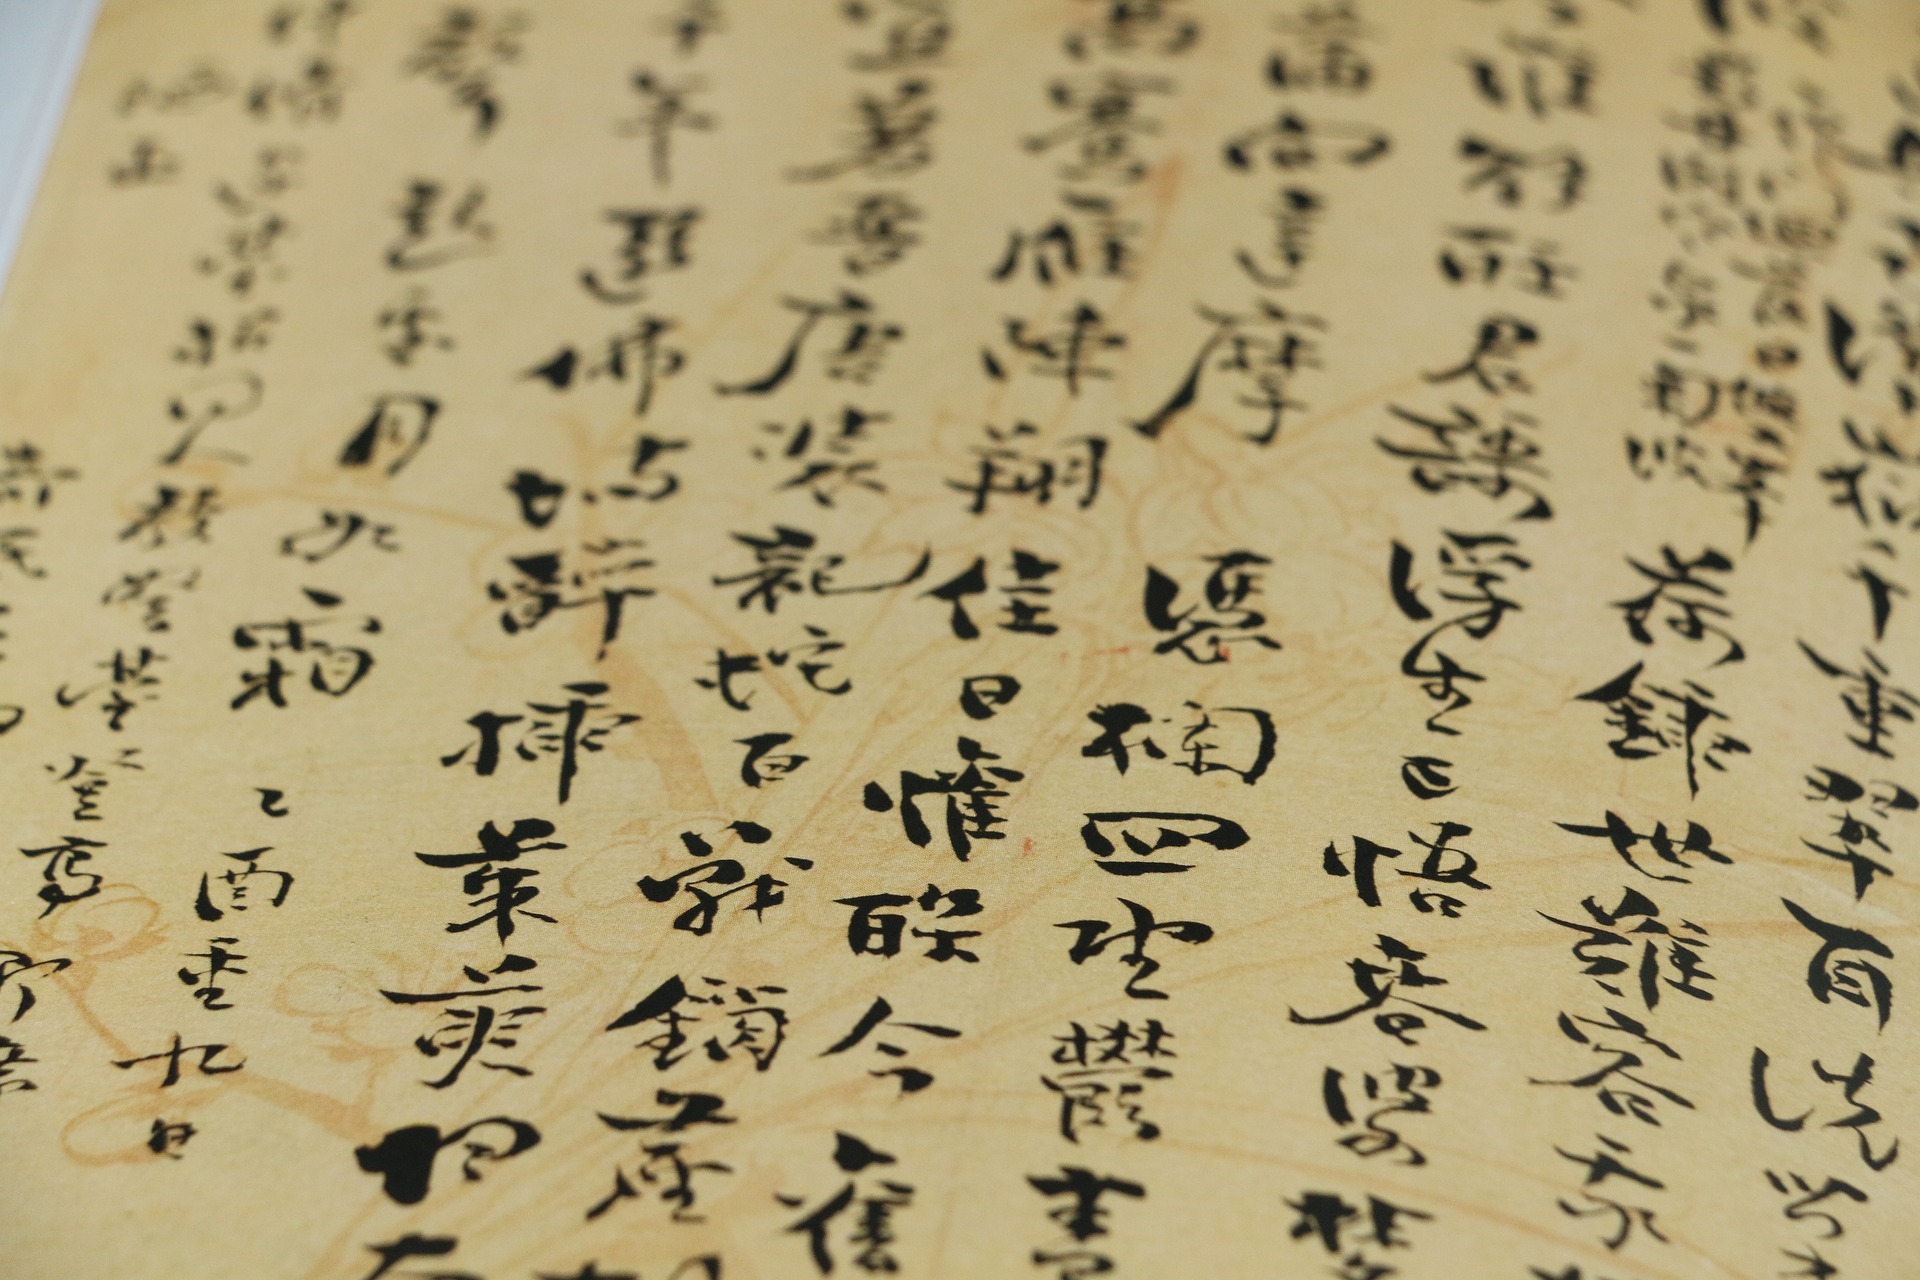 All About Chinese Writing – Answering your questions about Chinese